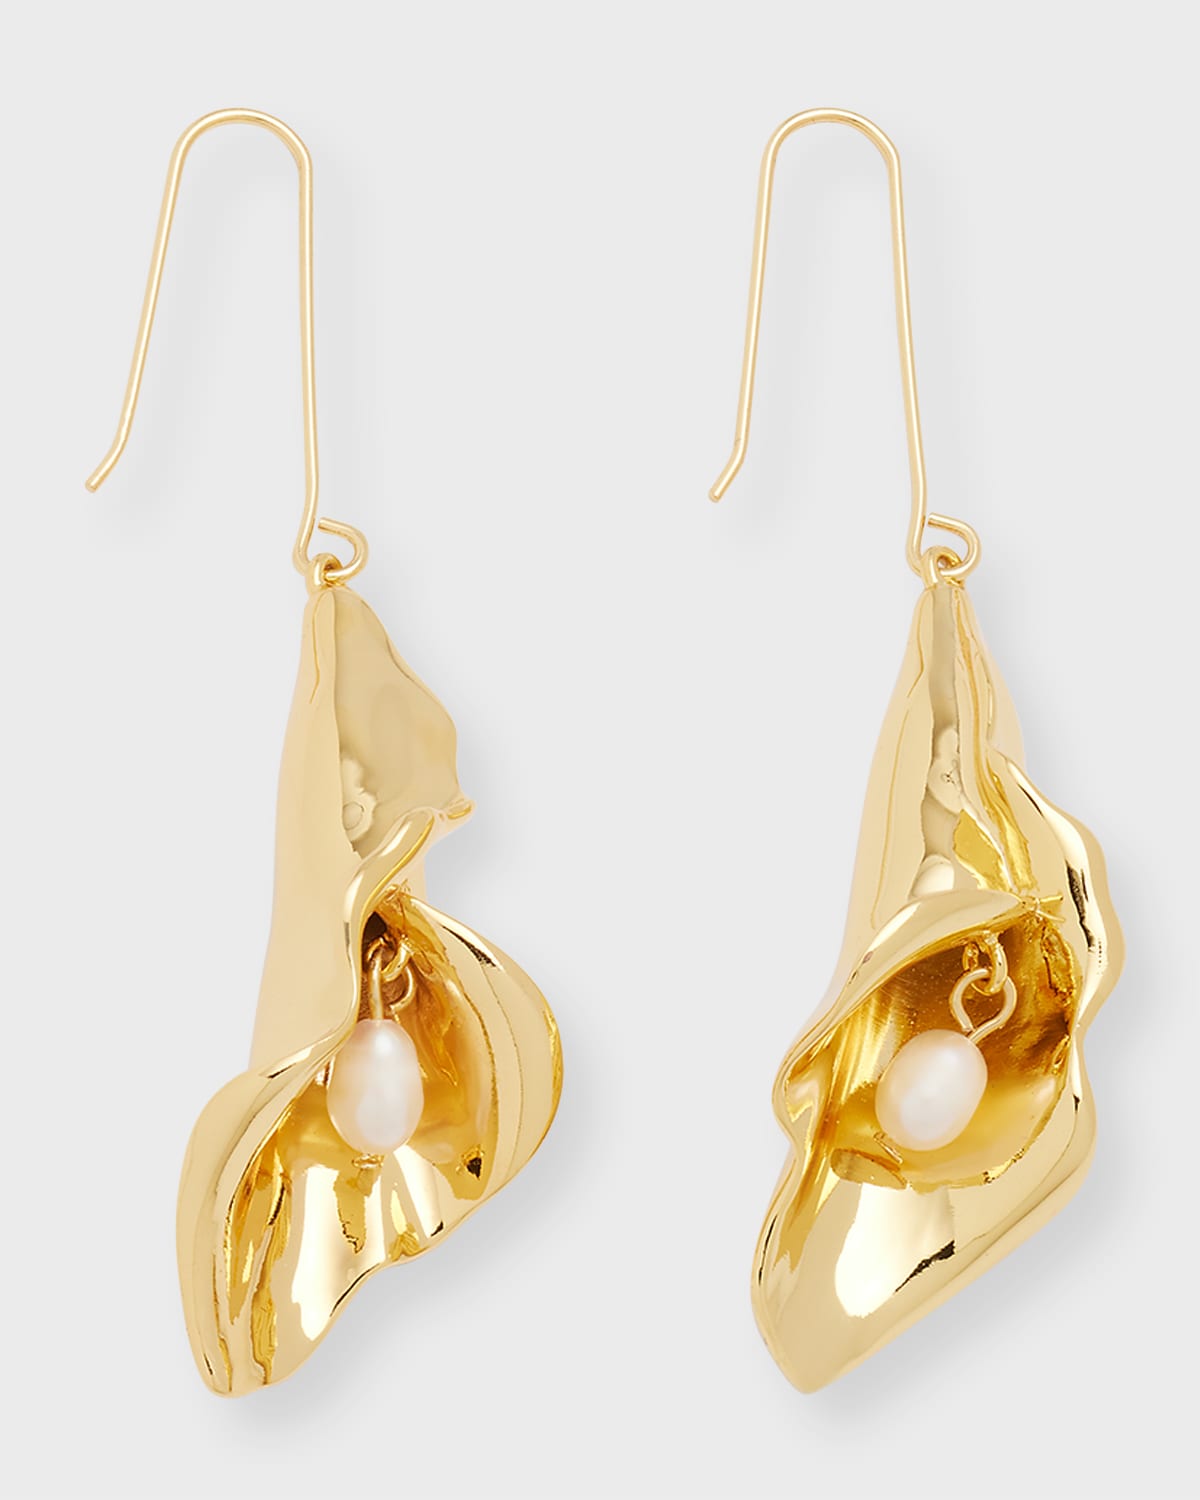 Mignonne Gavigan Women's Calla Lily 14k Gold-plated & Mother-of-pearl Drop Earrings